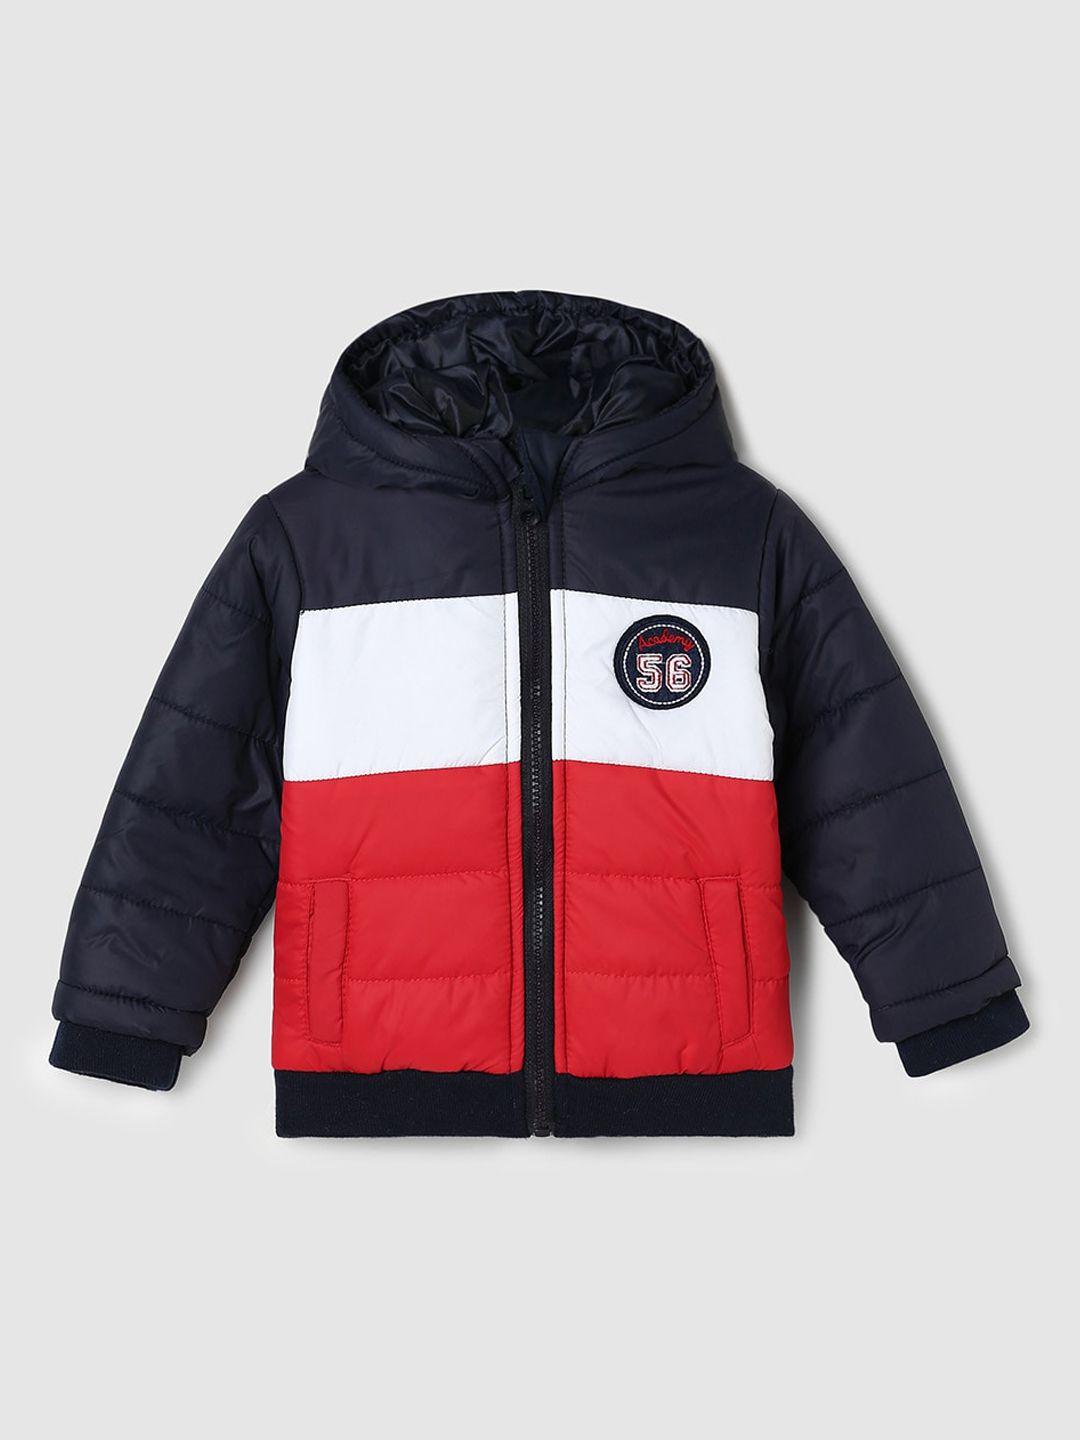 max-boys-black-&-red-colourblocked-hooded-puffer-jacket-with-patchwork